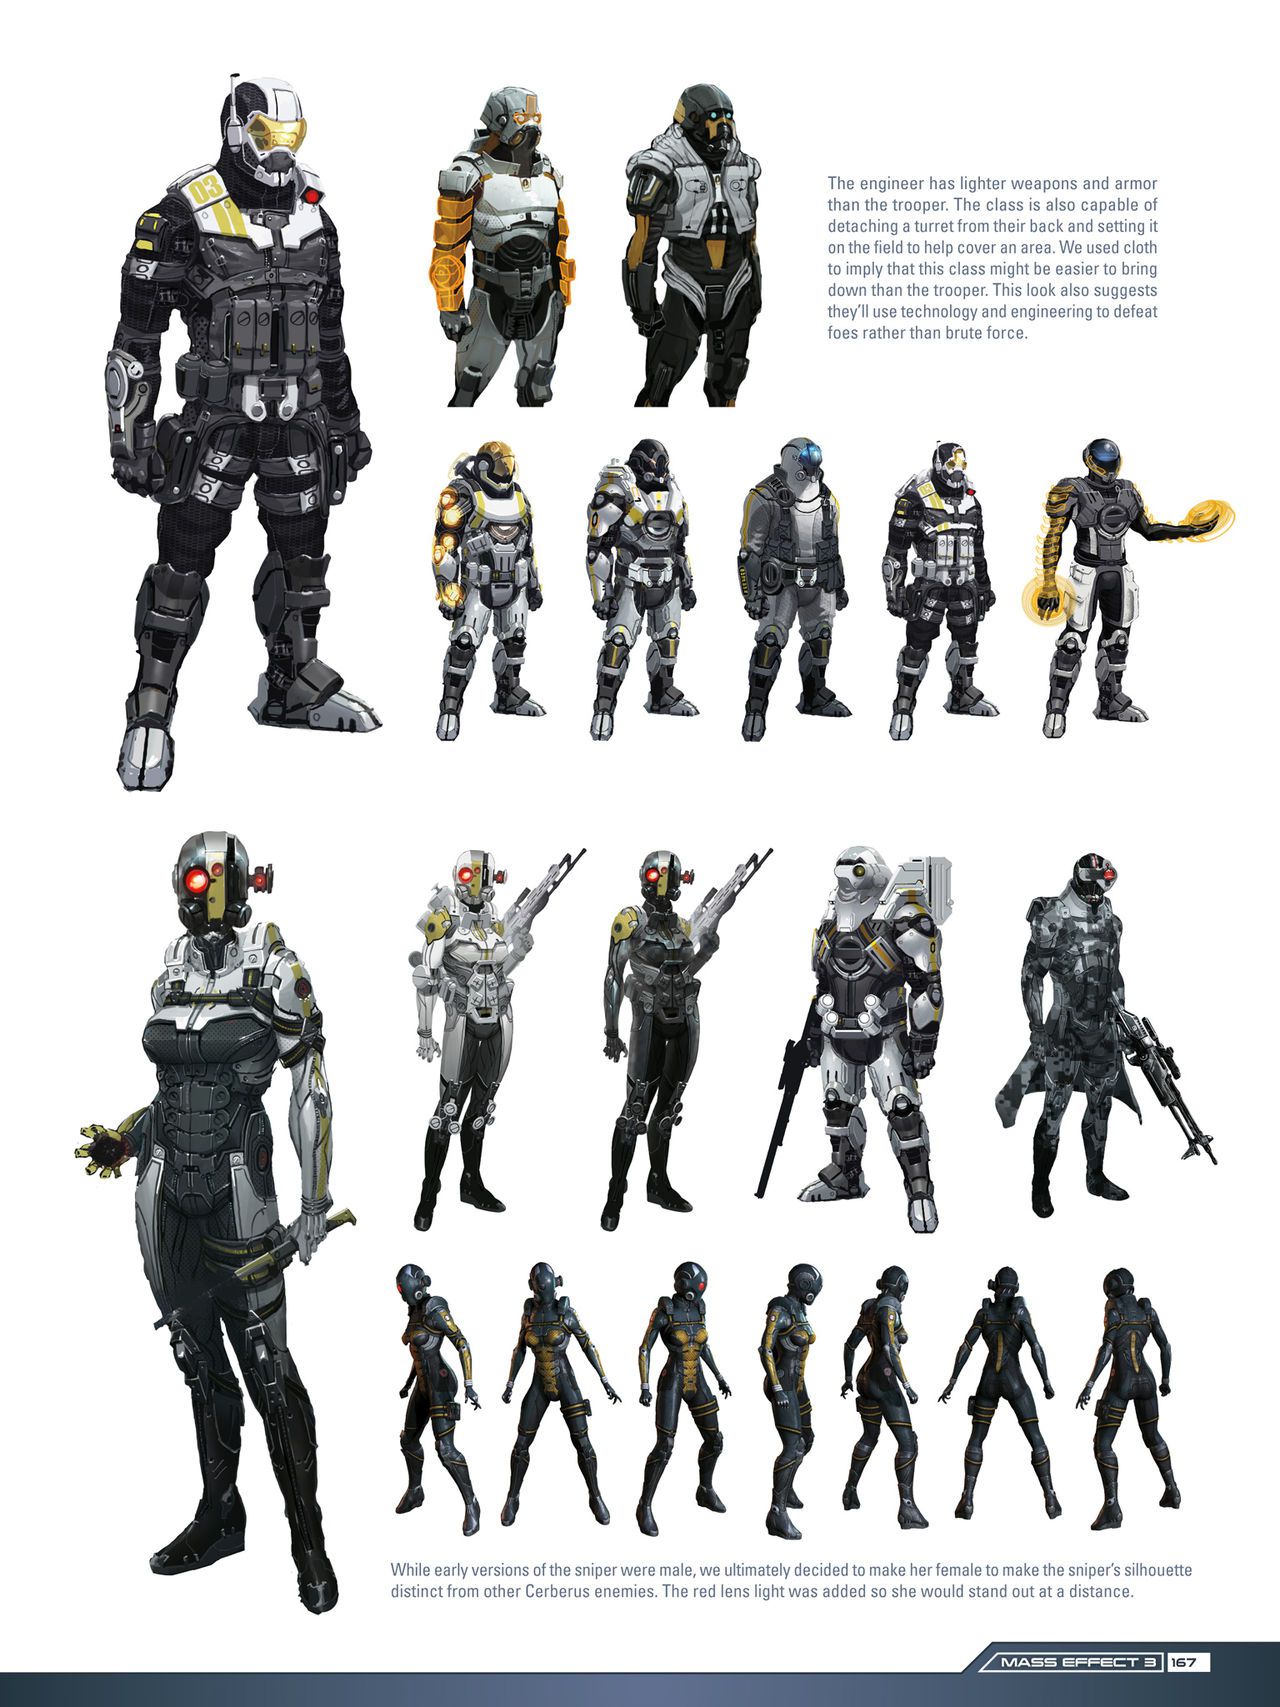 The Art of the Mass Effect Trilogy - Expanded Edition 167